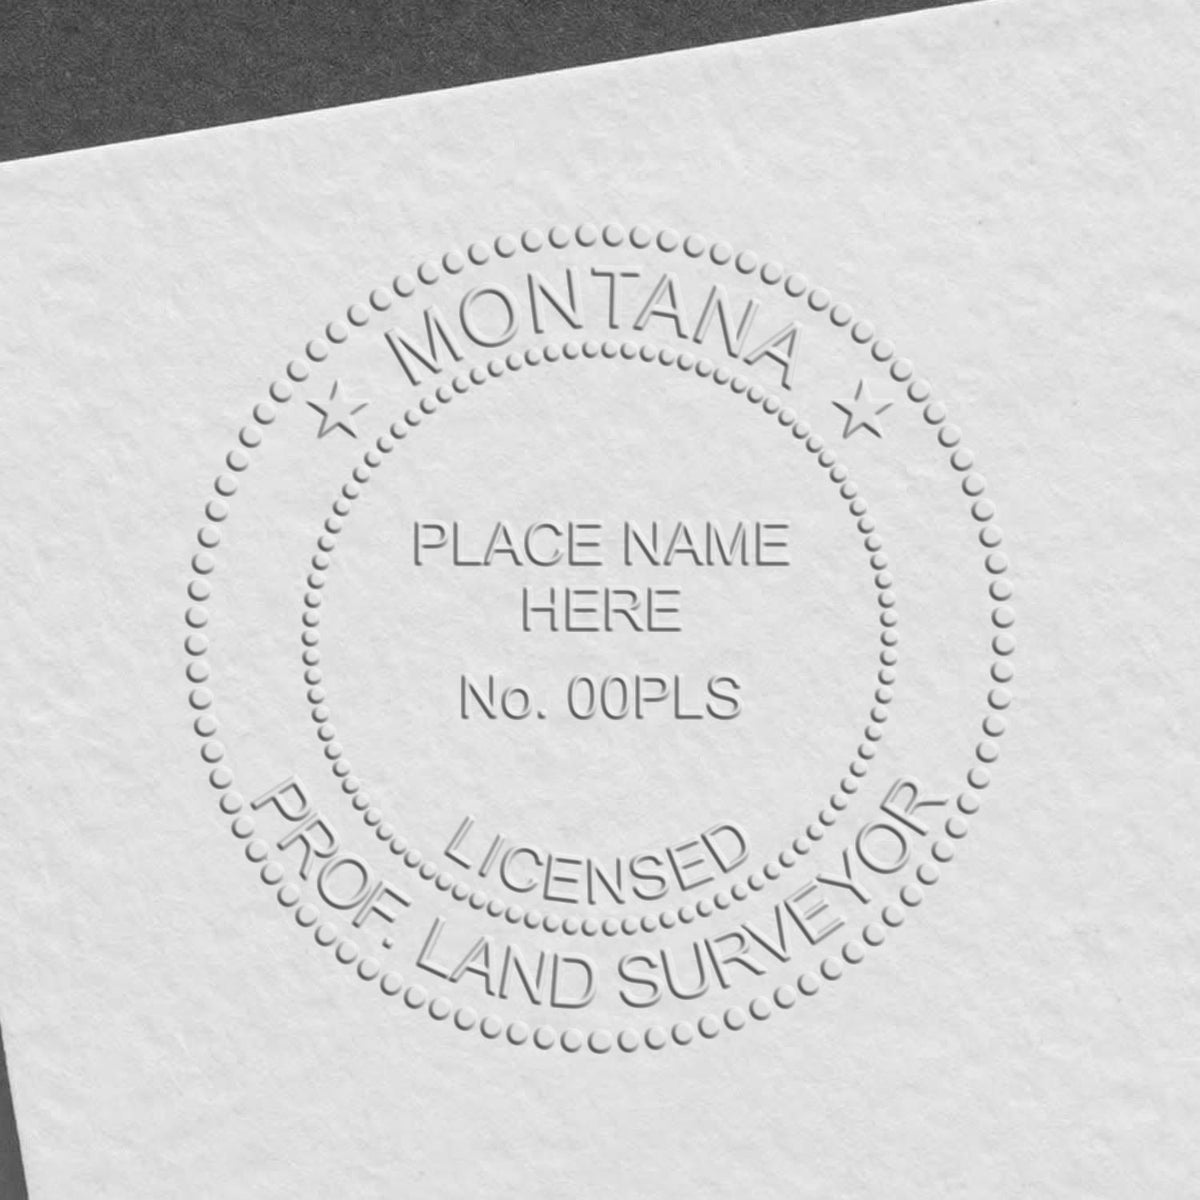 An in use photo of the Hybrid Montana Land Surveyor Seal showing a sample imprint on a cardstock